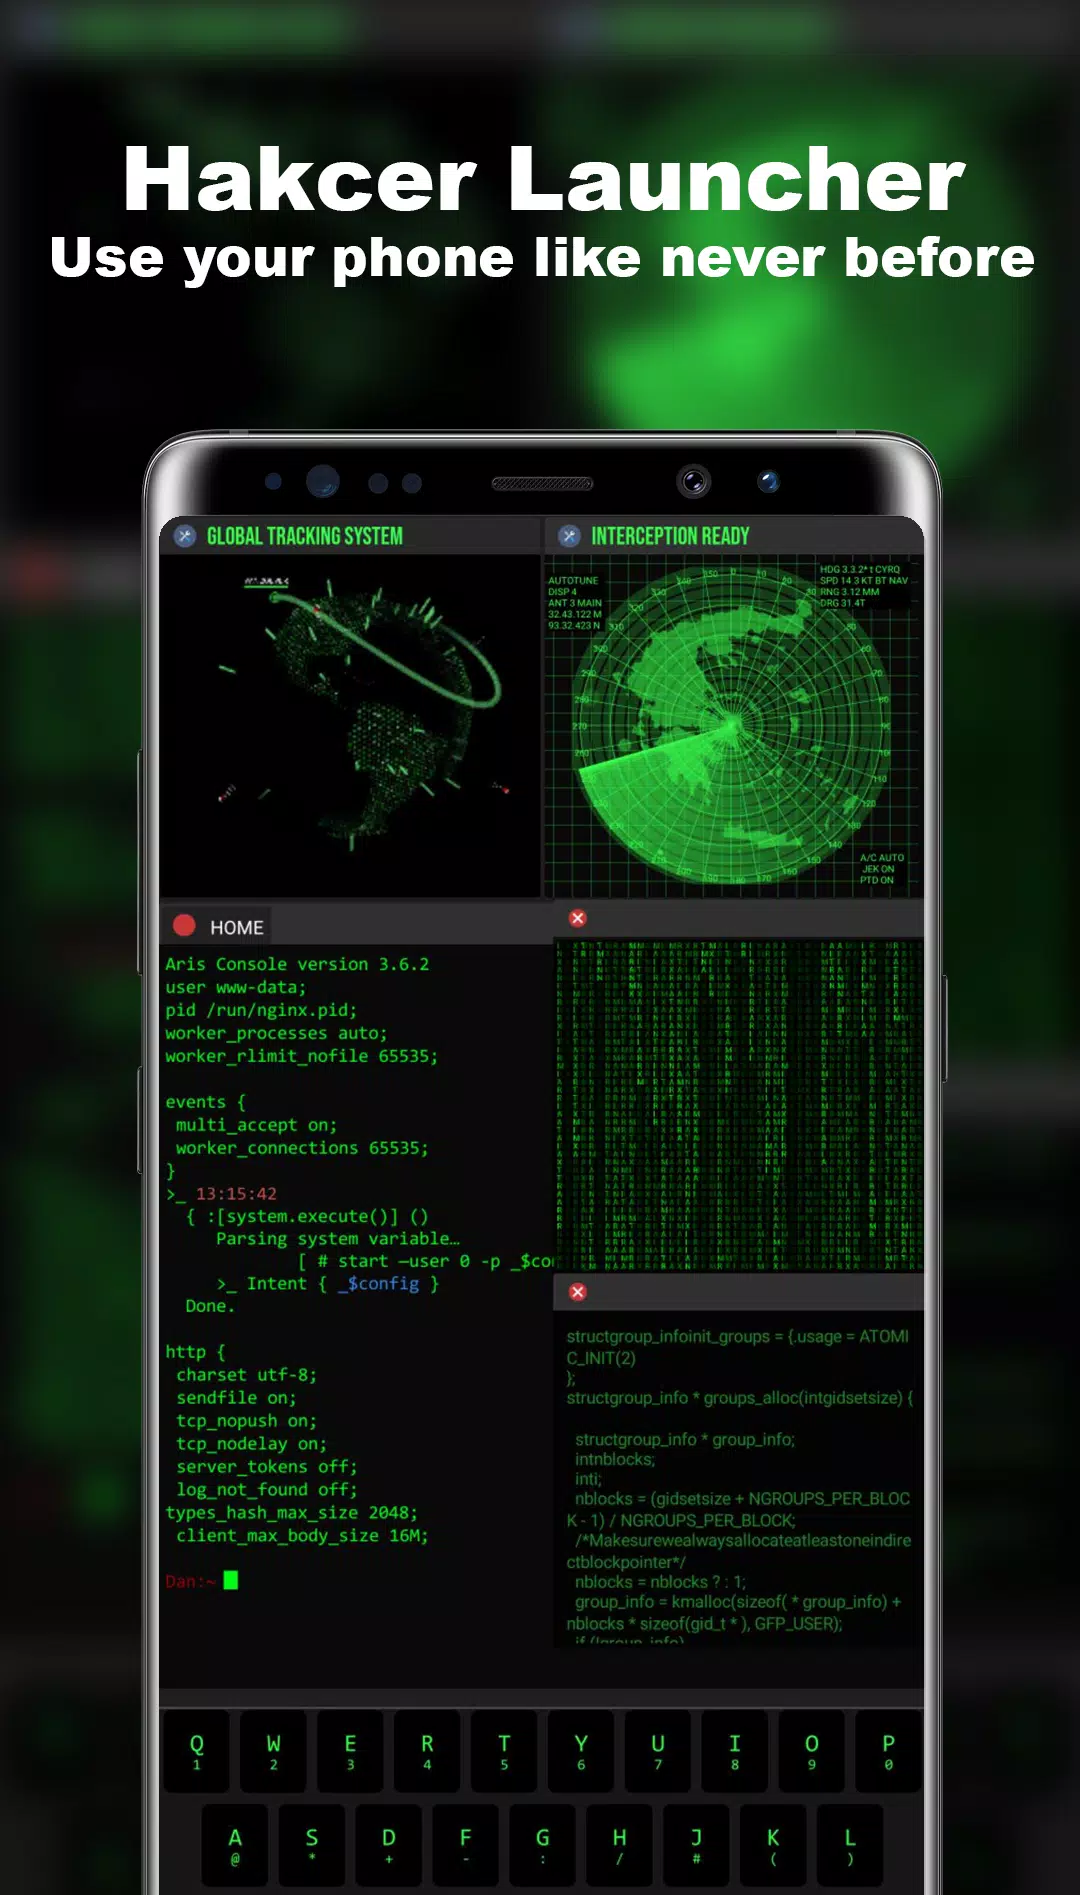 WWW Hacker Prank APK for Android Download